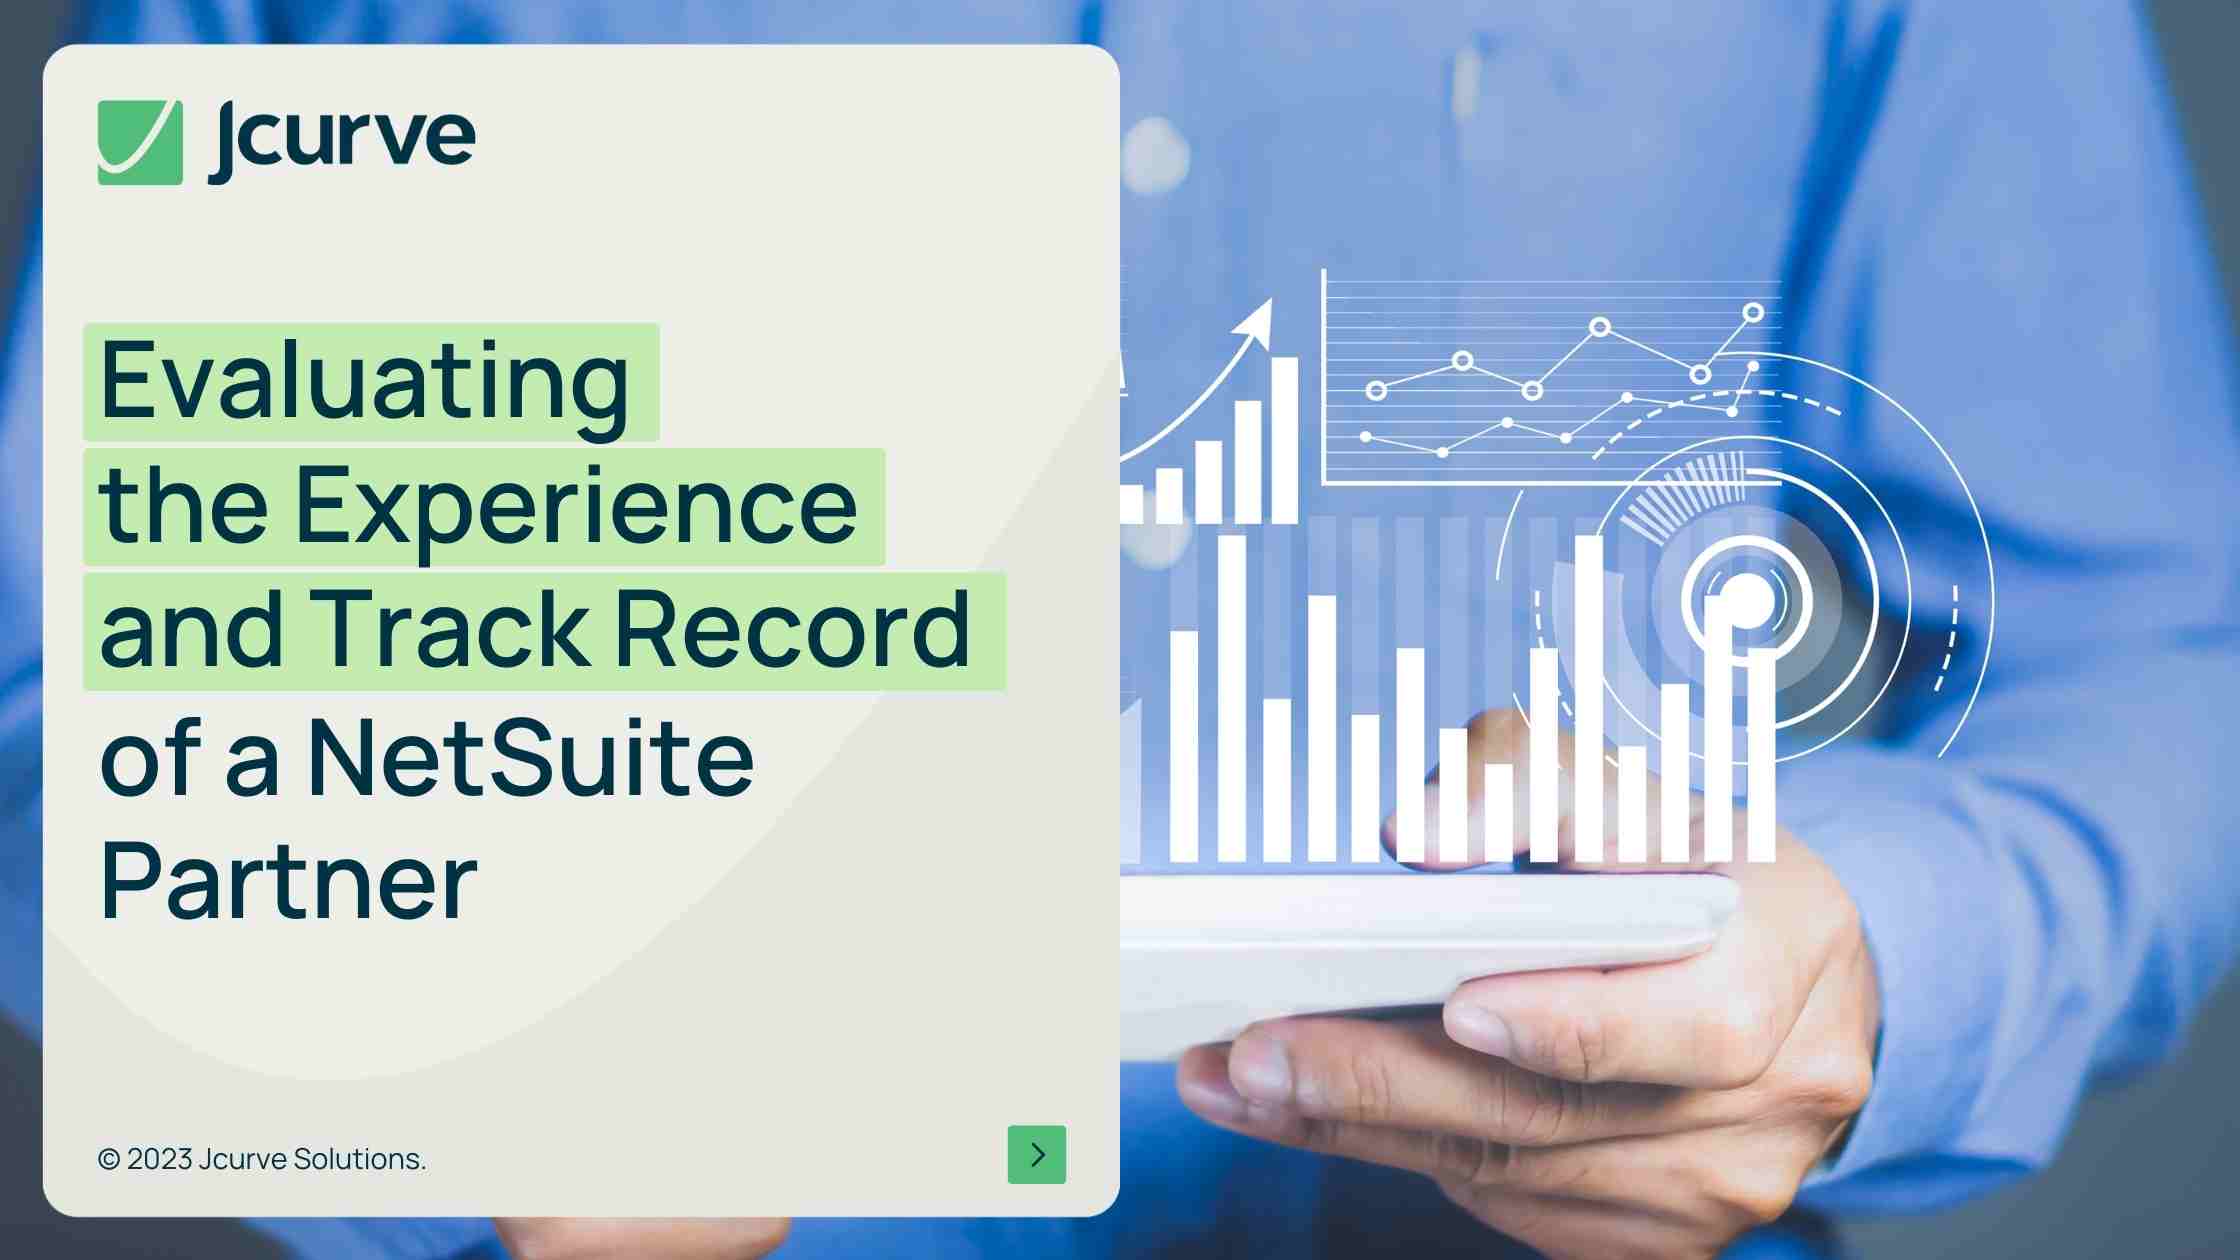 Evaluating the Experience and Track Record of a NetSuite Partner